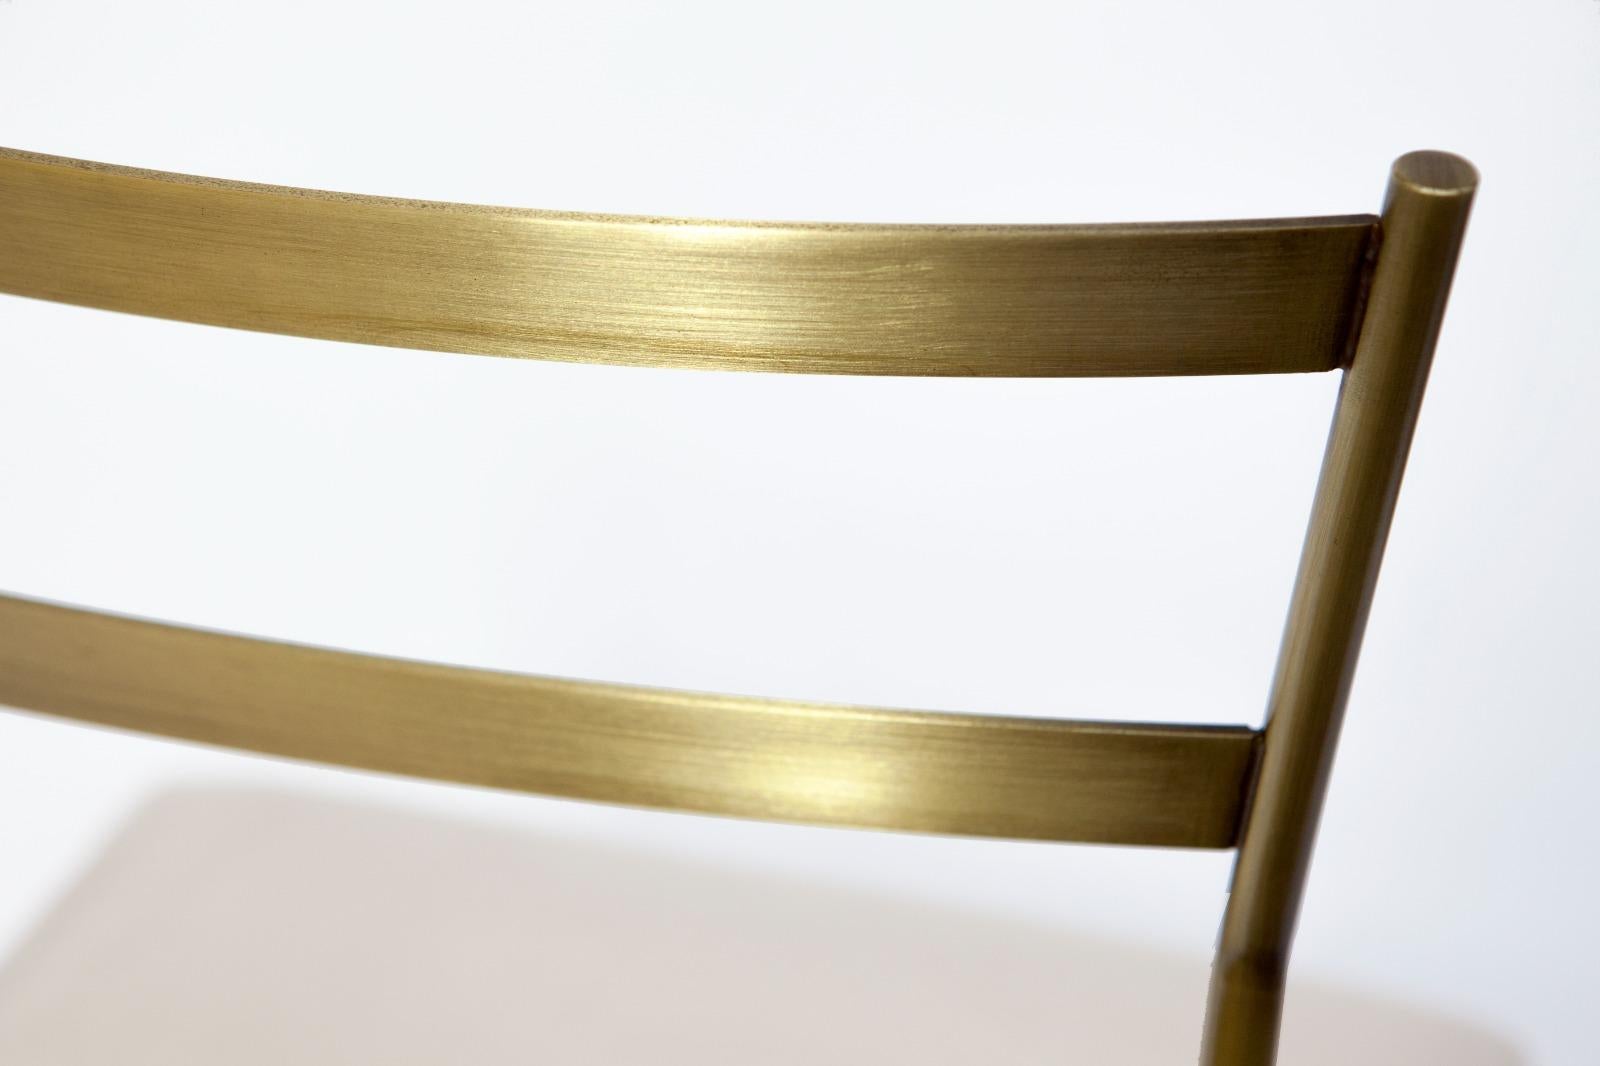 This skillfully hand-crafted Pontina chair will make a distinctive statement in a sophisticated contemporary interior with its understated elegance. Showcasing a minimalist silhouette, that is entirely handcrafted in satin brass finished iron with